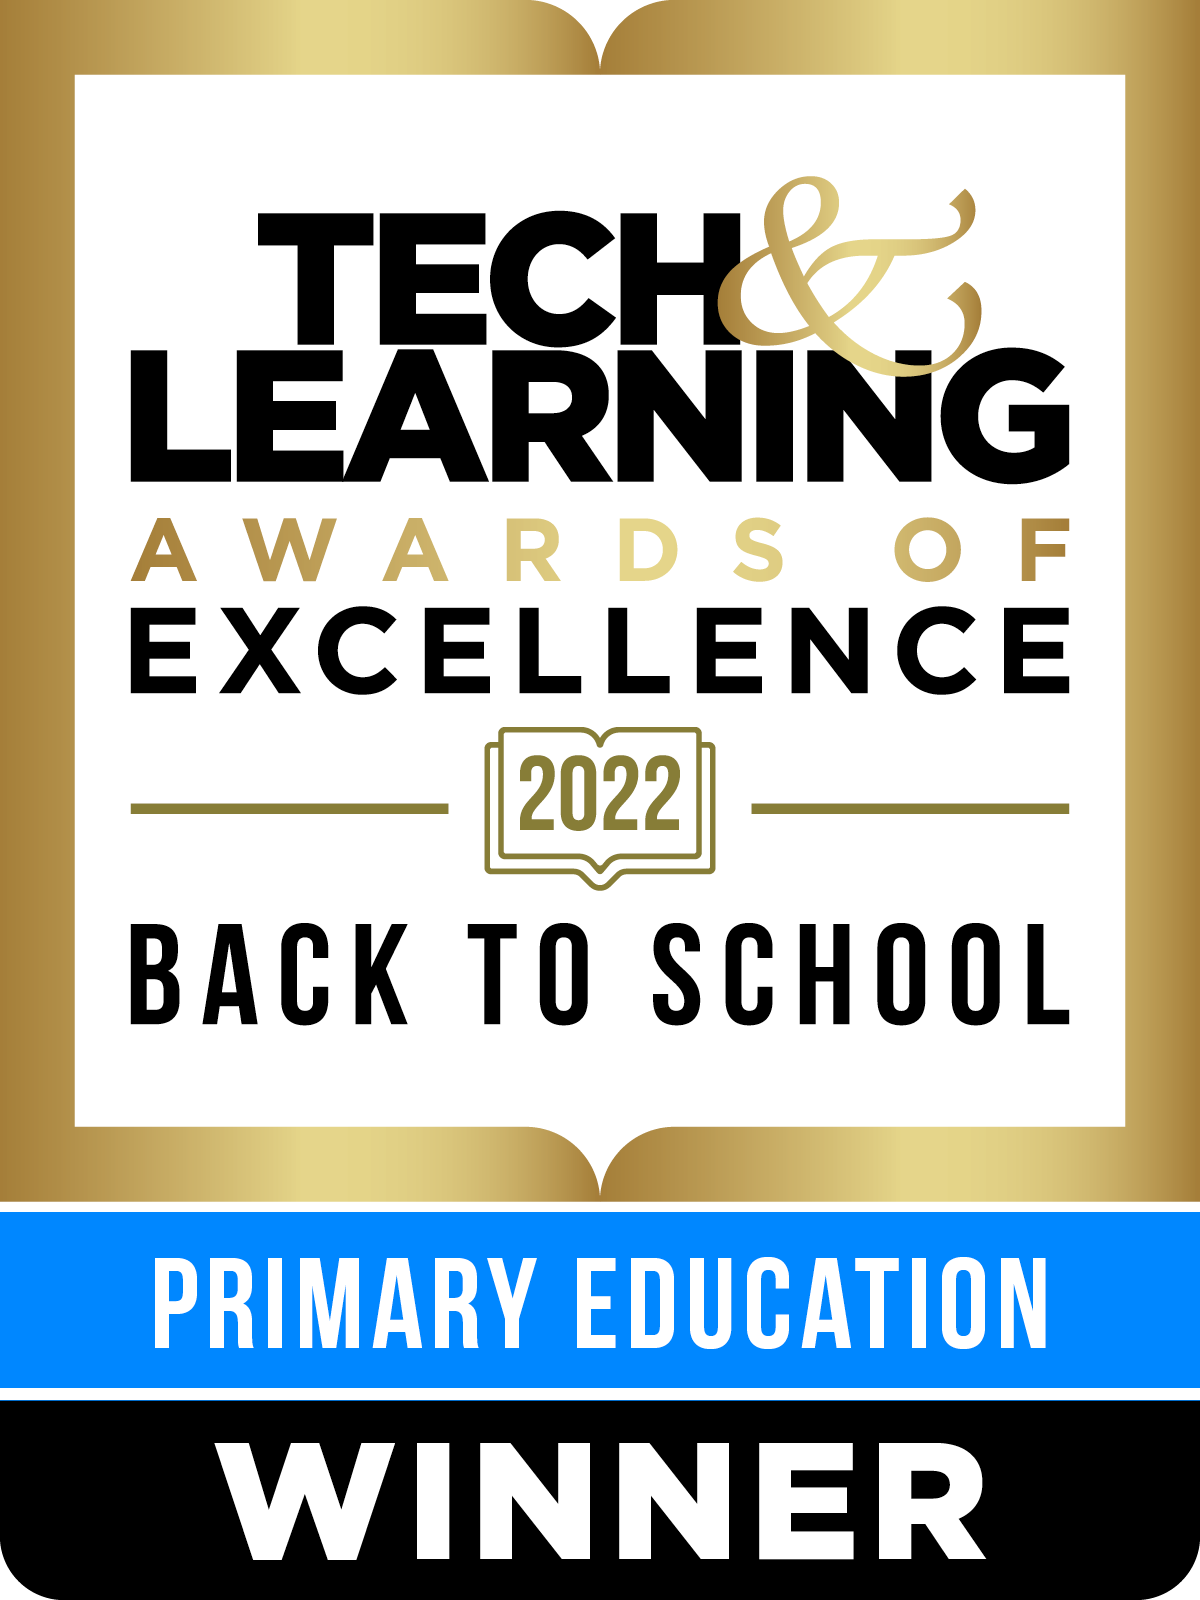 Bloomz Wins Tech & Learning Award of Excellence - Back to School 2022